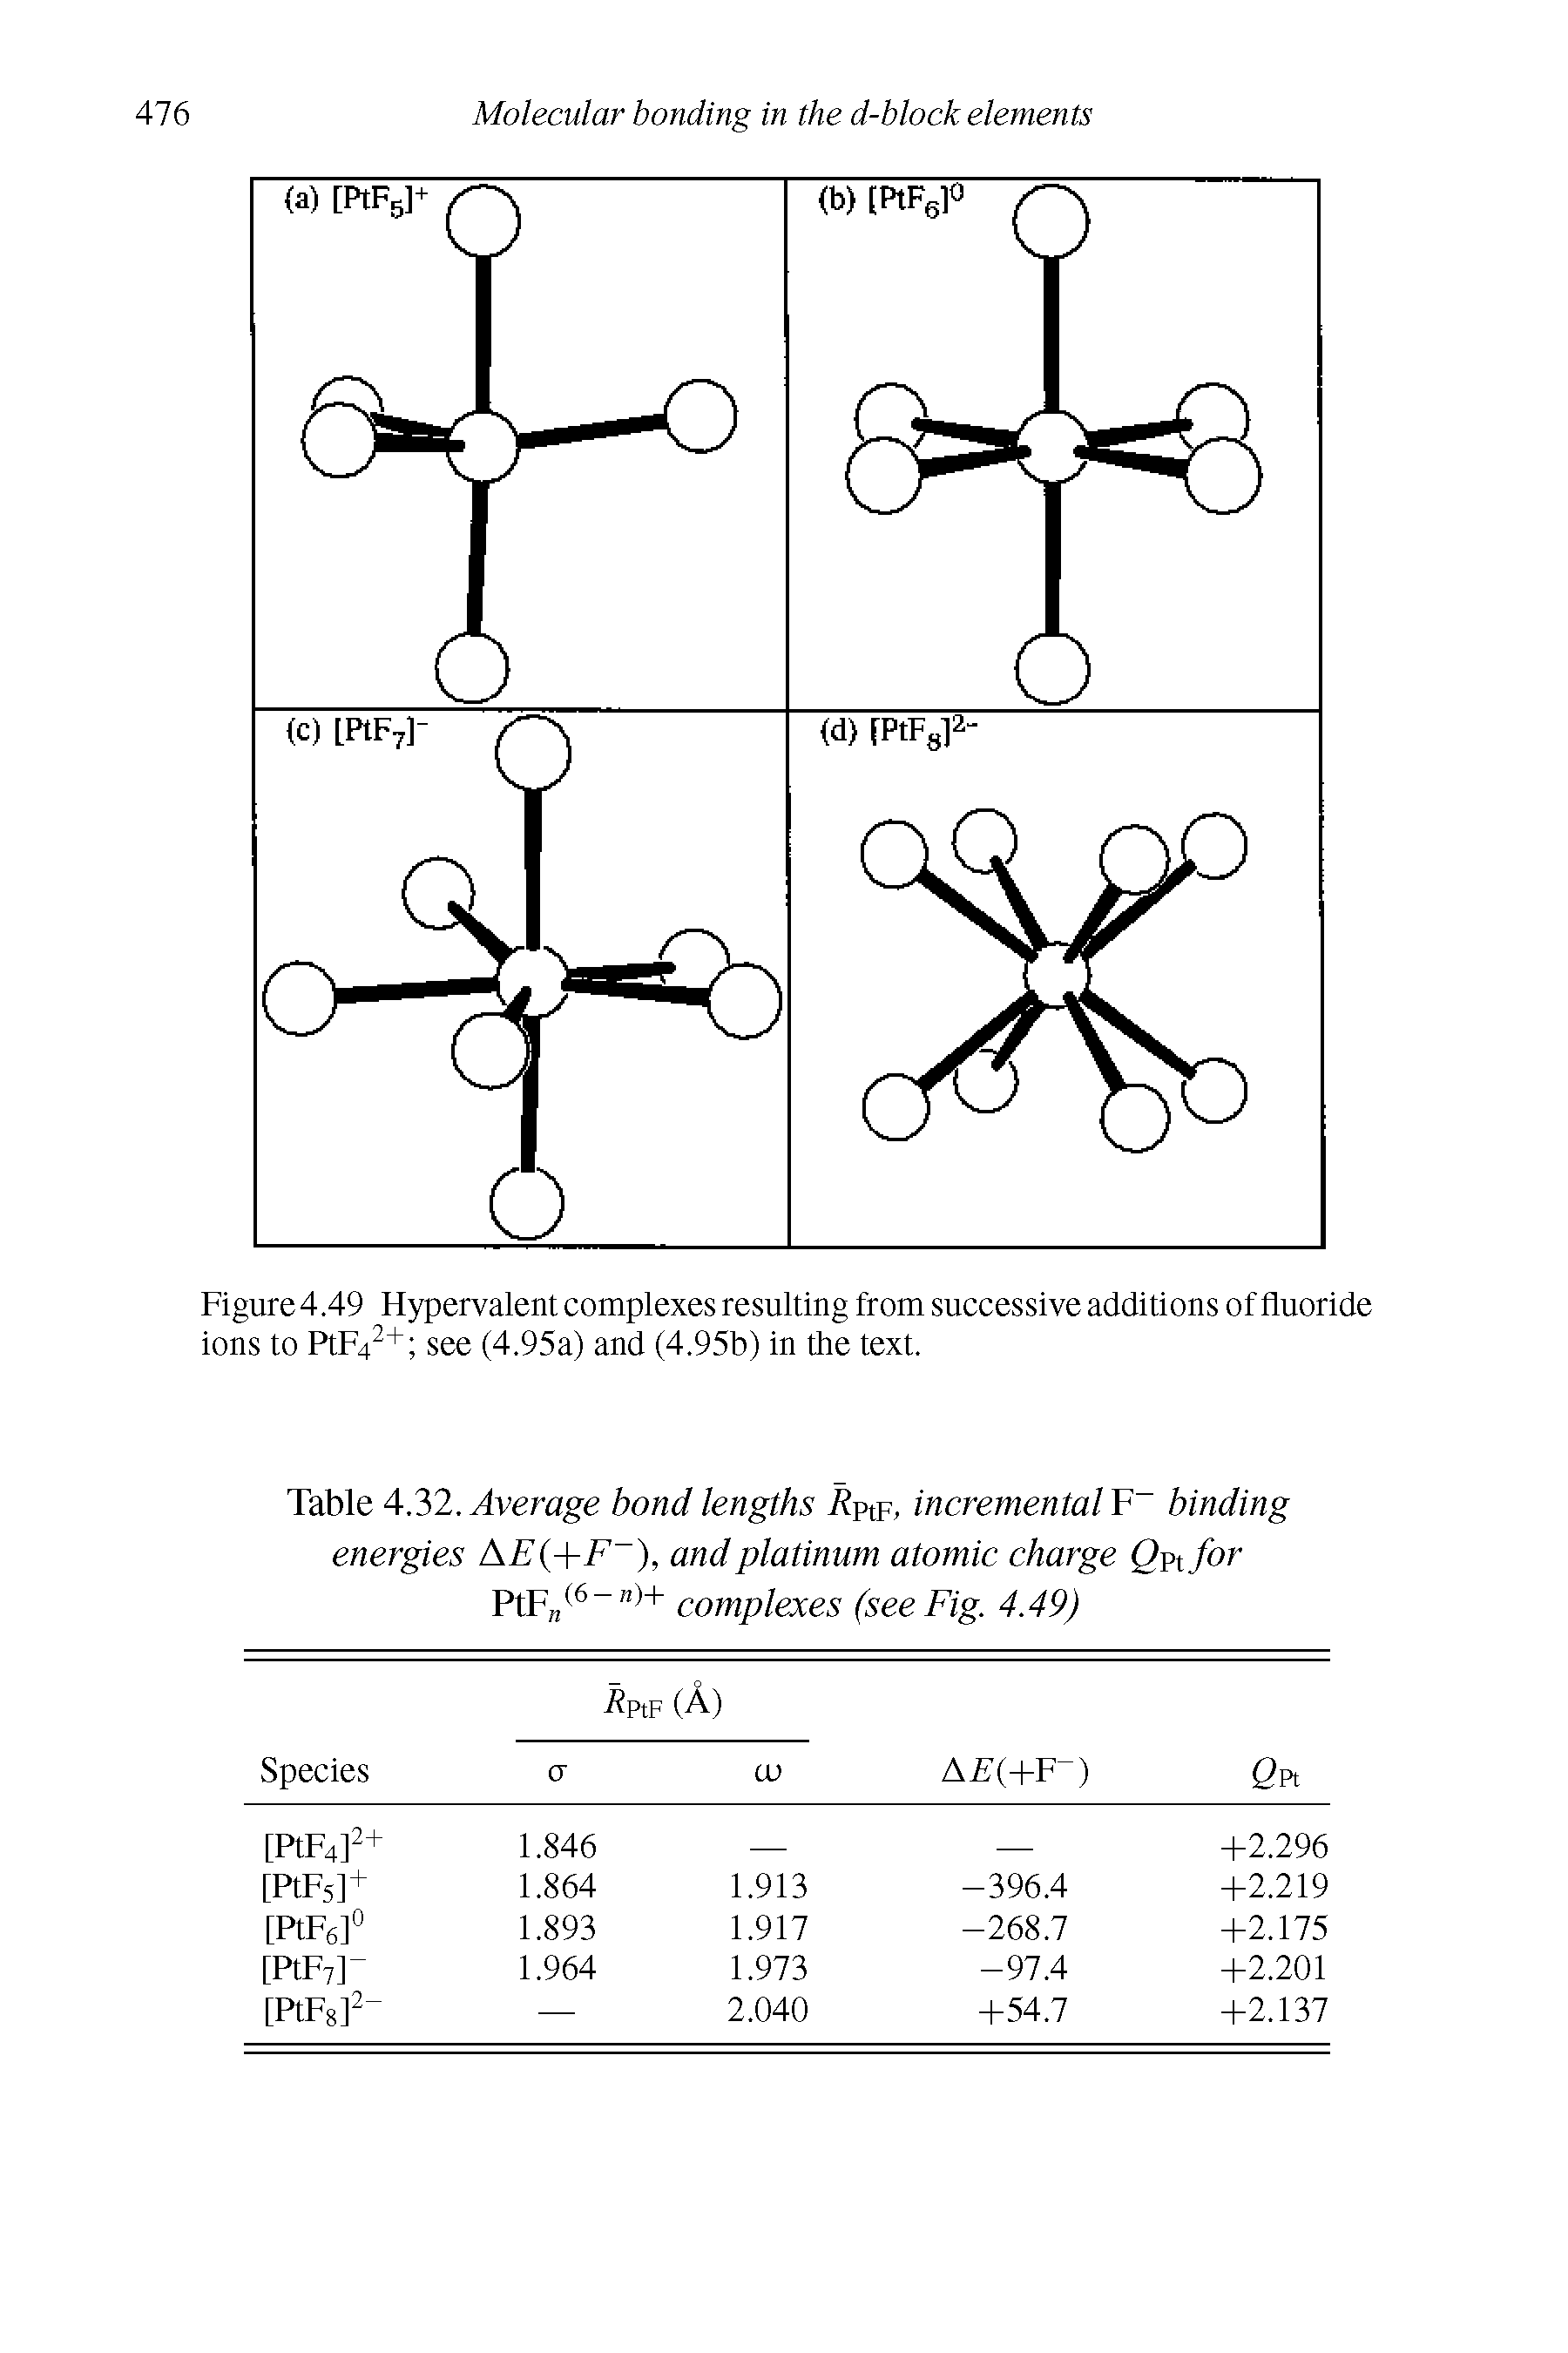 Figure4.49 Hypervalent complexes resulting from successive additions of fluoride ions to PtF42+ see (4.95a) and (4.95b) in the text.